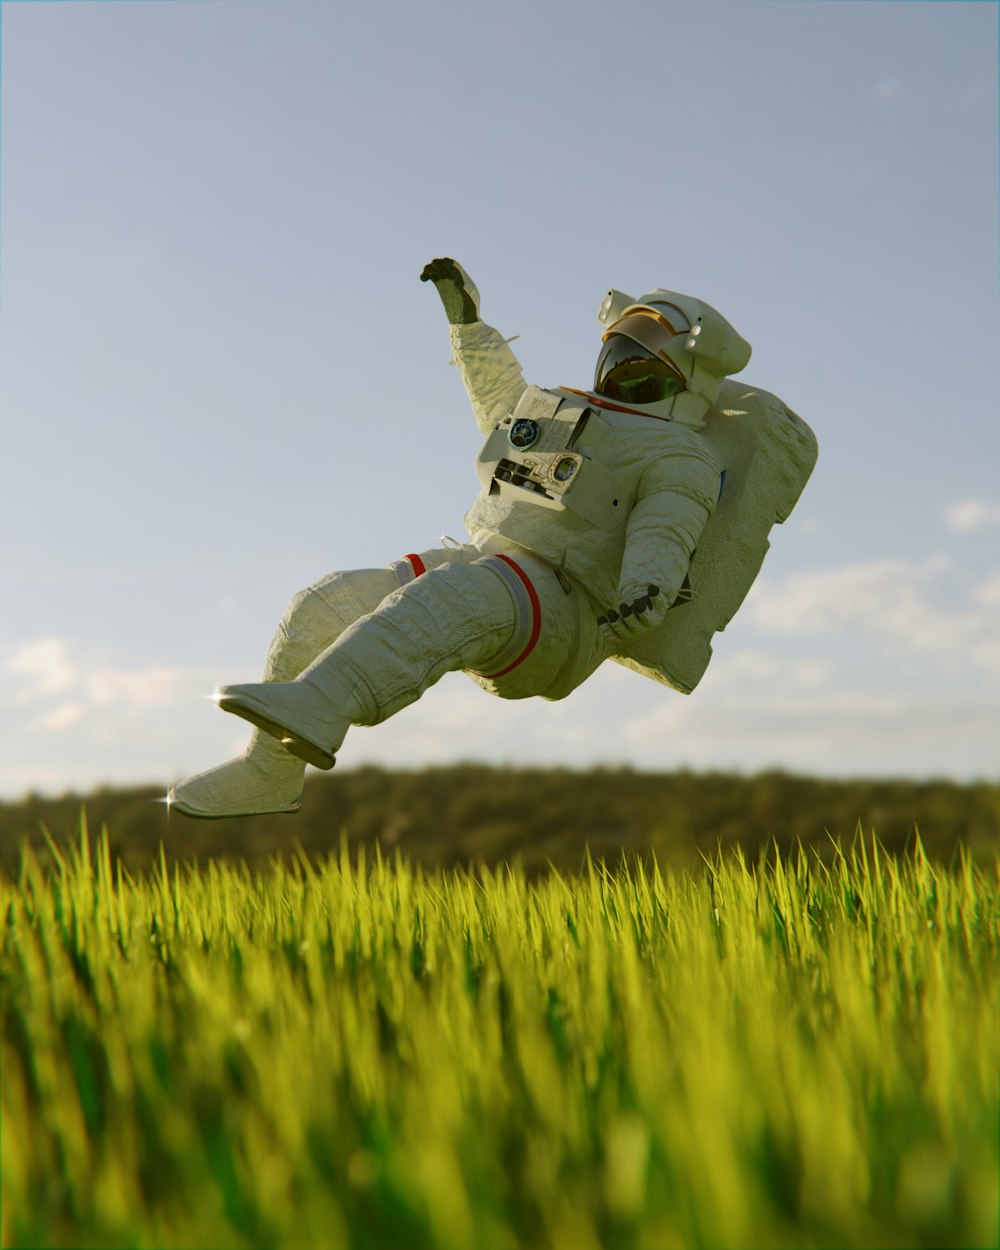 a person in a space suit in the air above grass